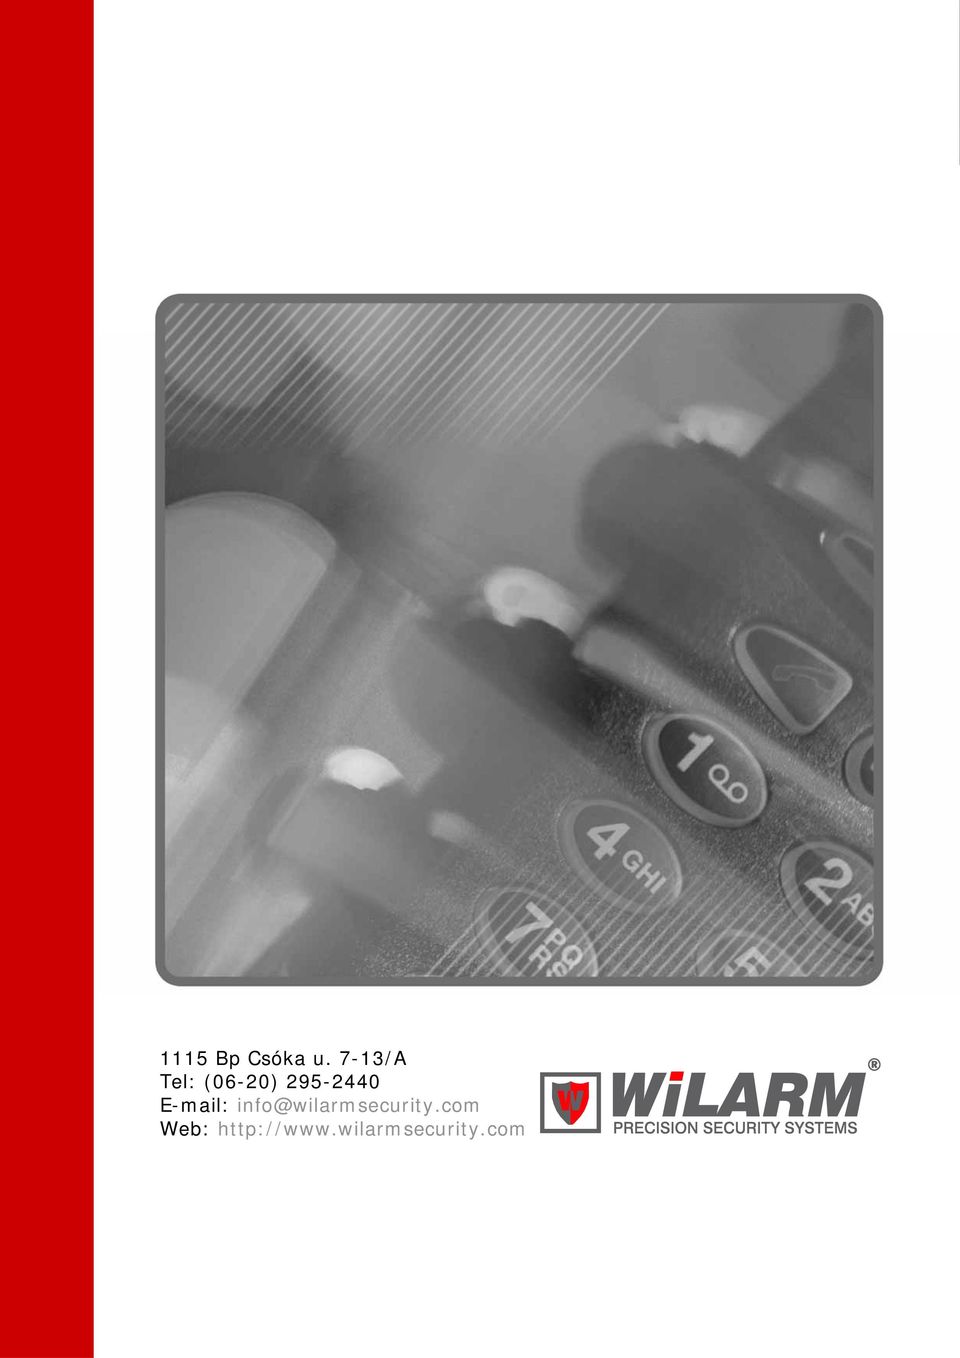 E-mail: info@wilarmsecurity.